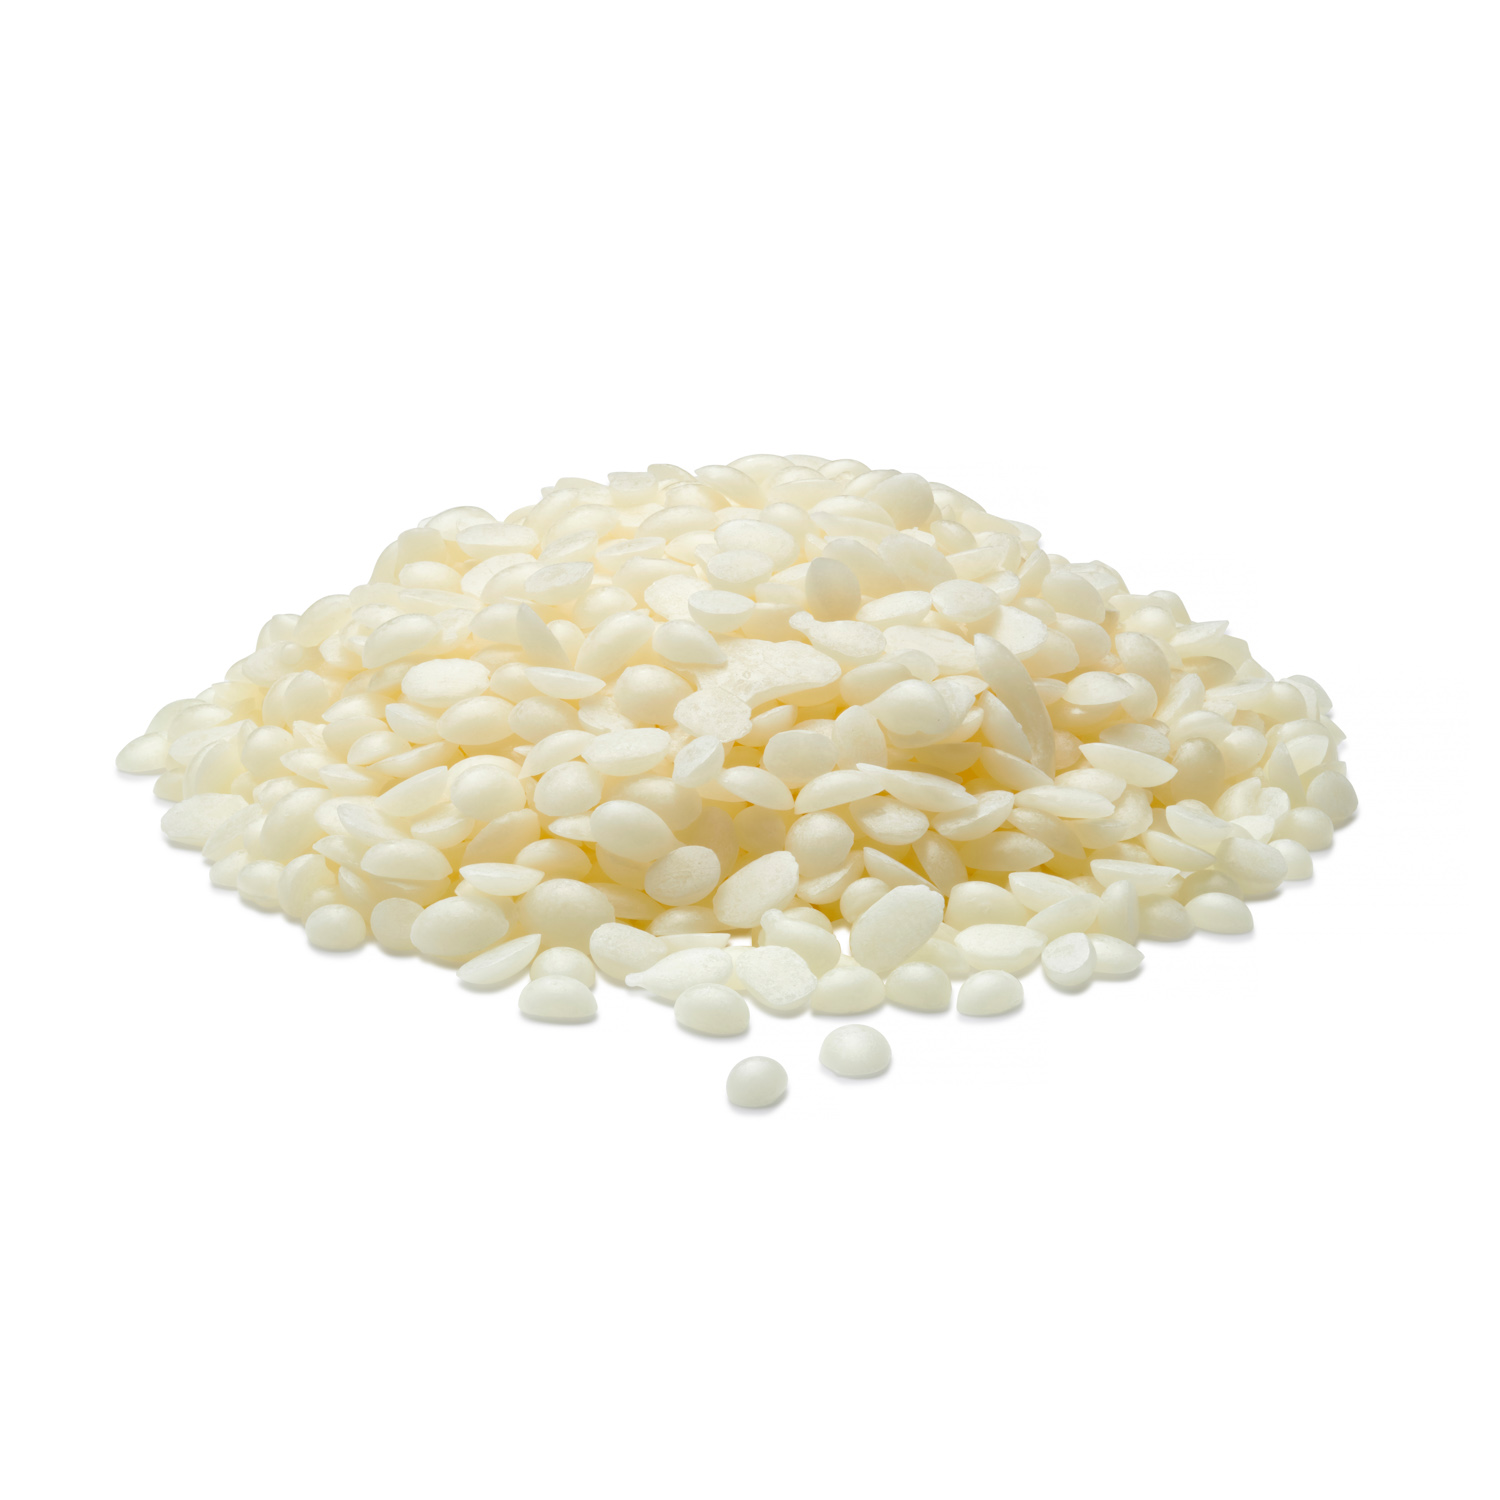 Pellets of Technical Grade White Beeswax